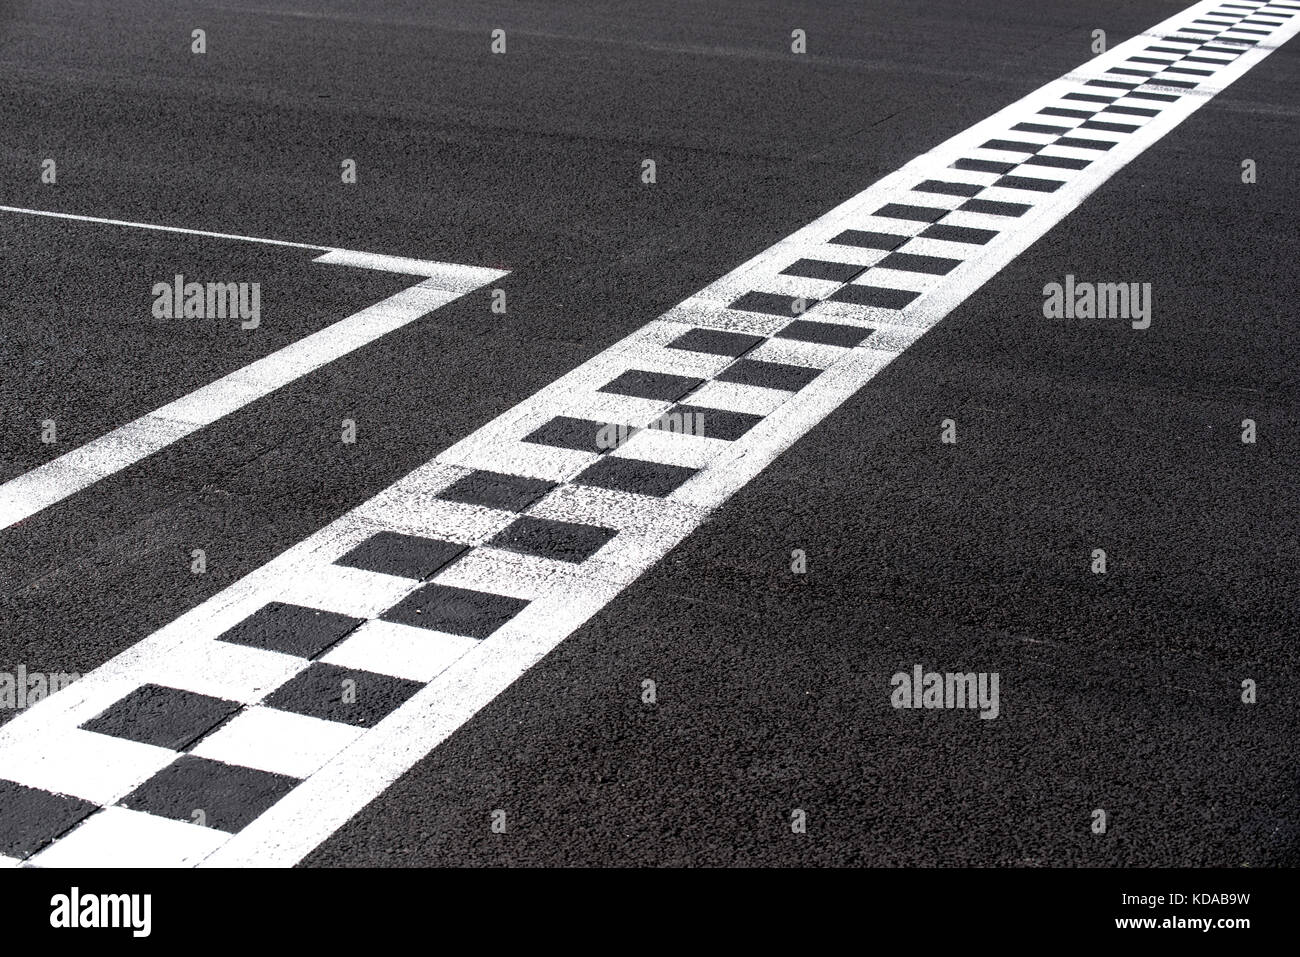 Checkered Line On Track